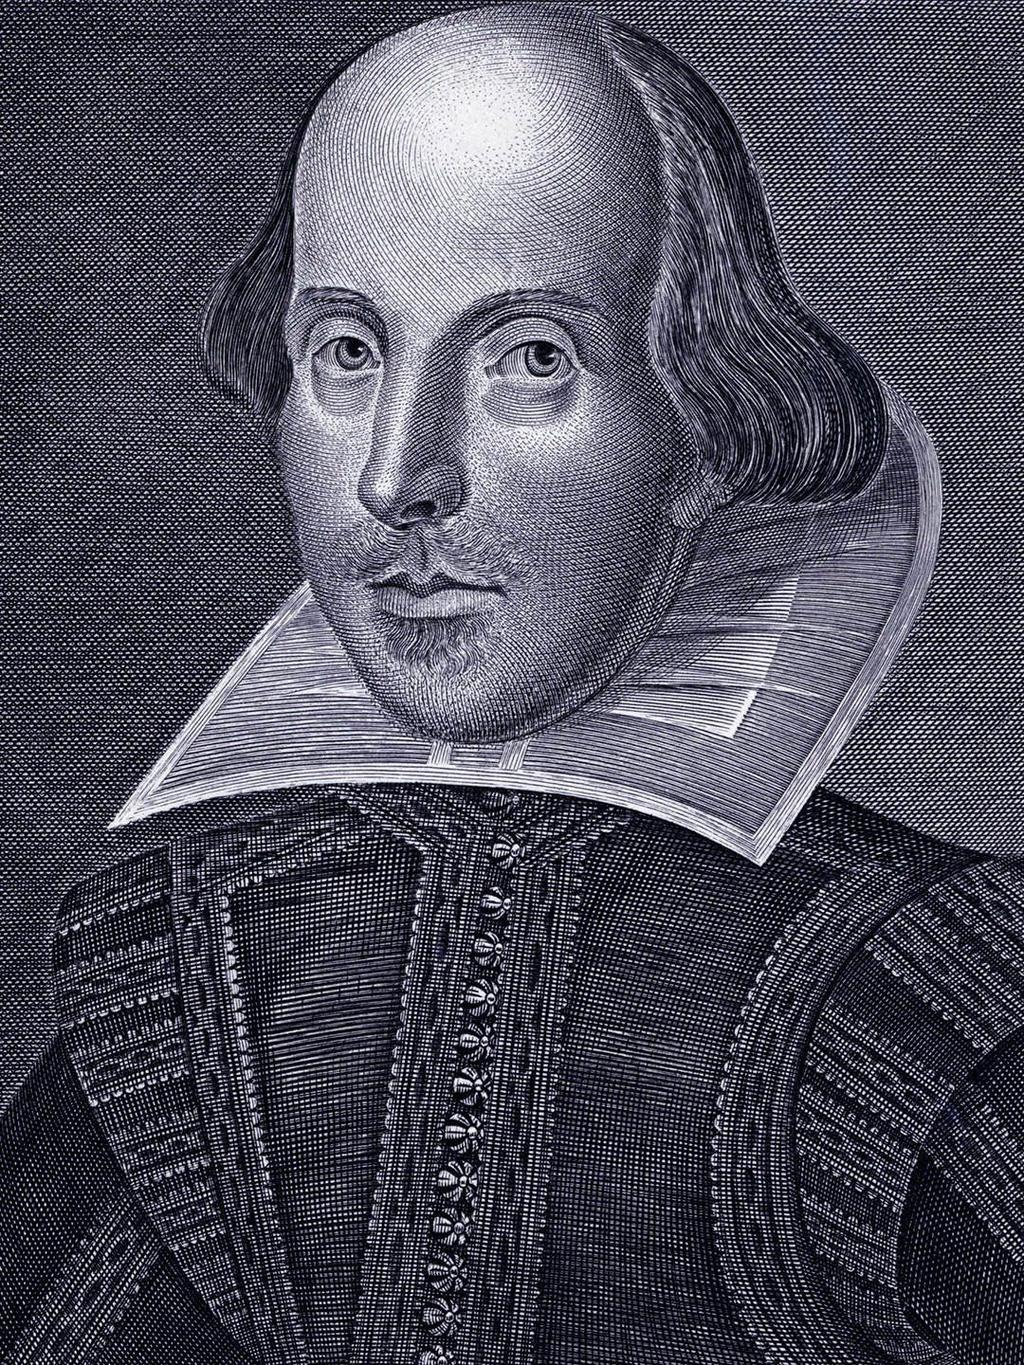 English poet, playwright and actor. Shakespeare widely regarded as the greatest writer in the English language and the world's greatest dramatist.